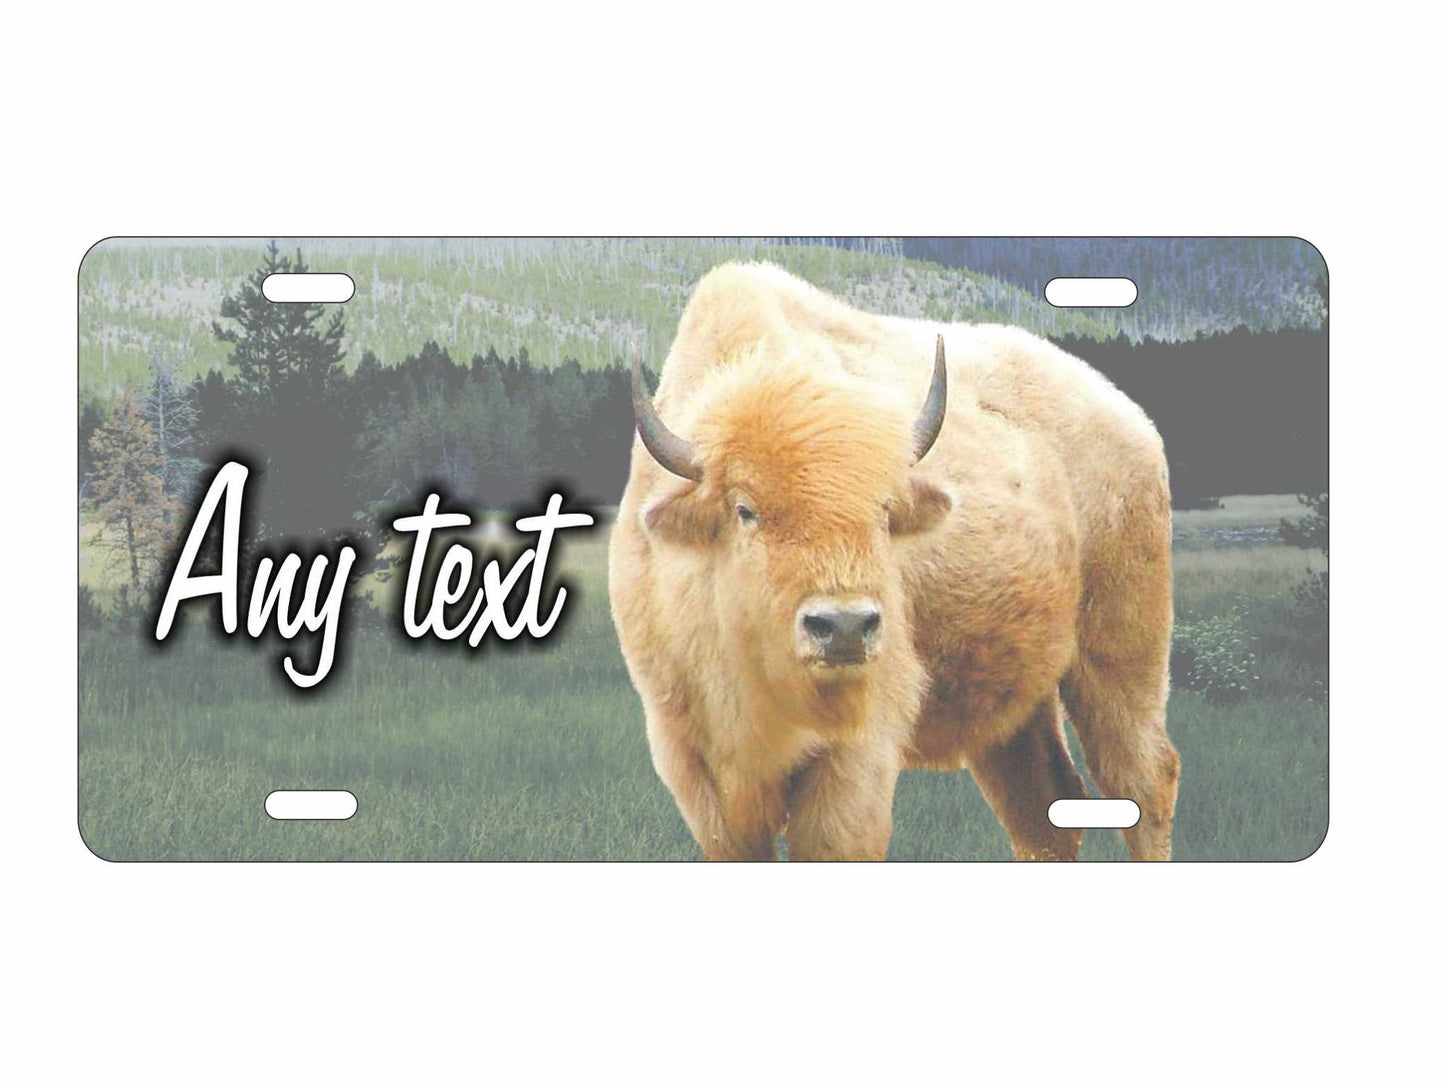 Bison Native American White Buffalo personalized novelty front license plate Decorative custom car tag